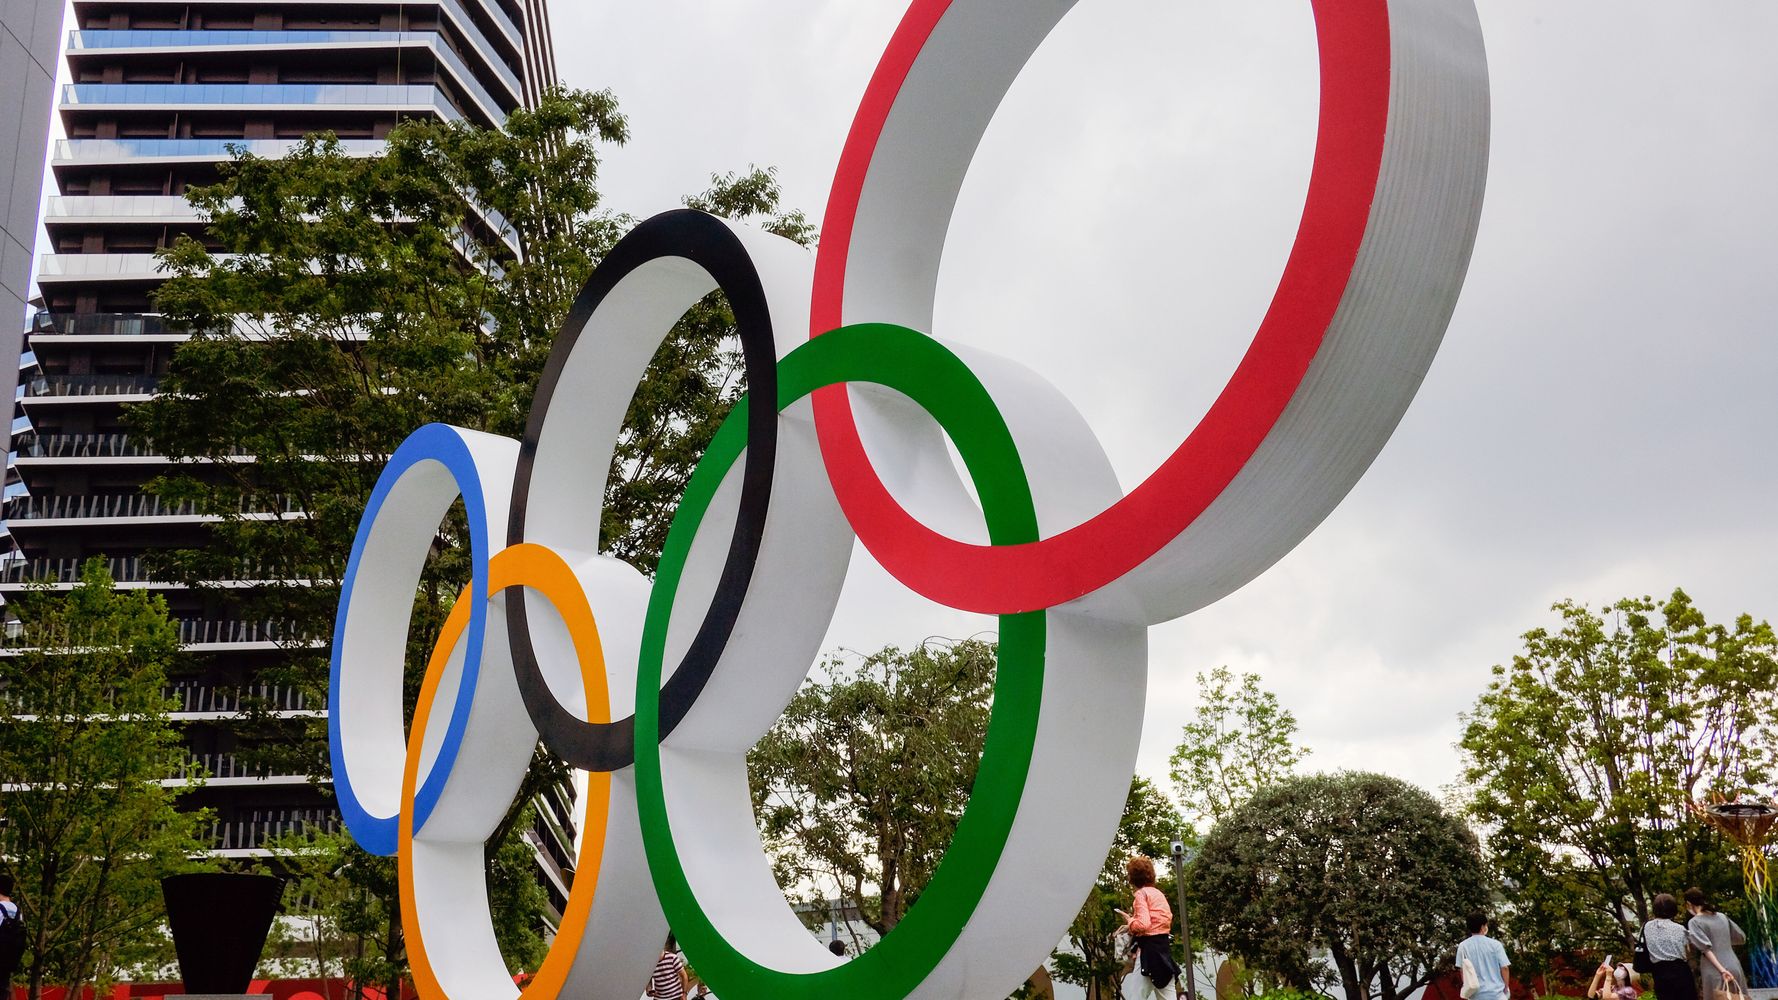 Tokyo Olympics: First Resident Of Olympic Village Tests Positive For COVID-19